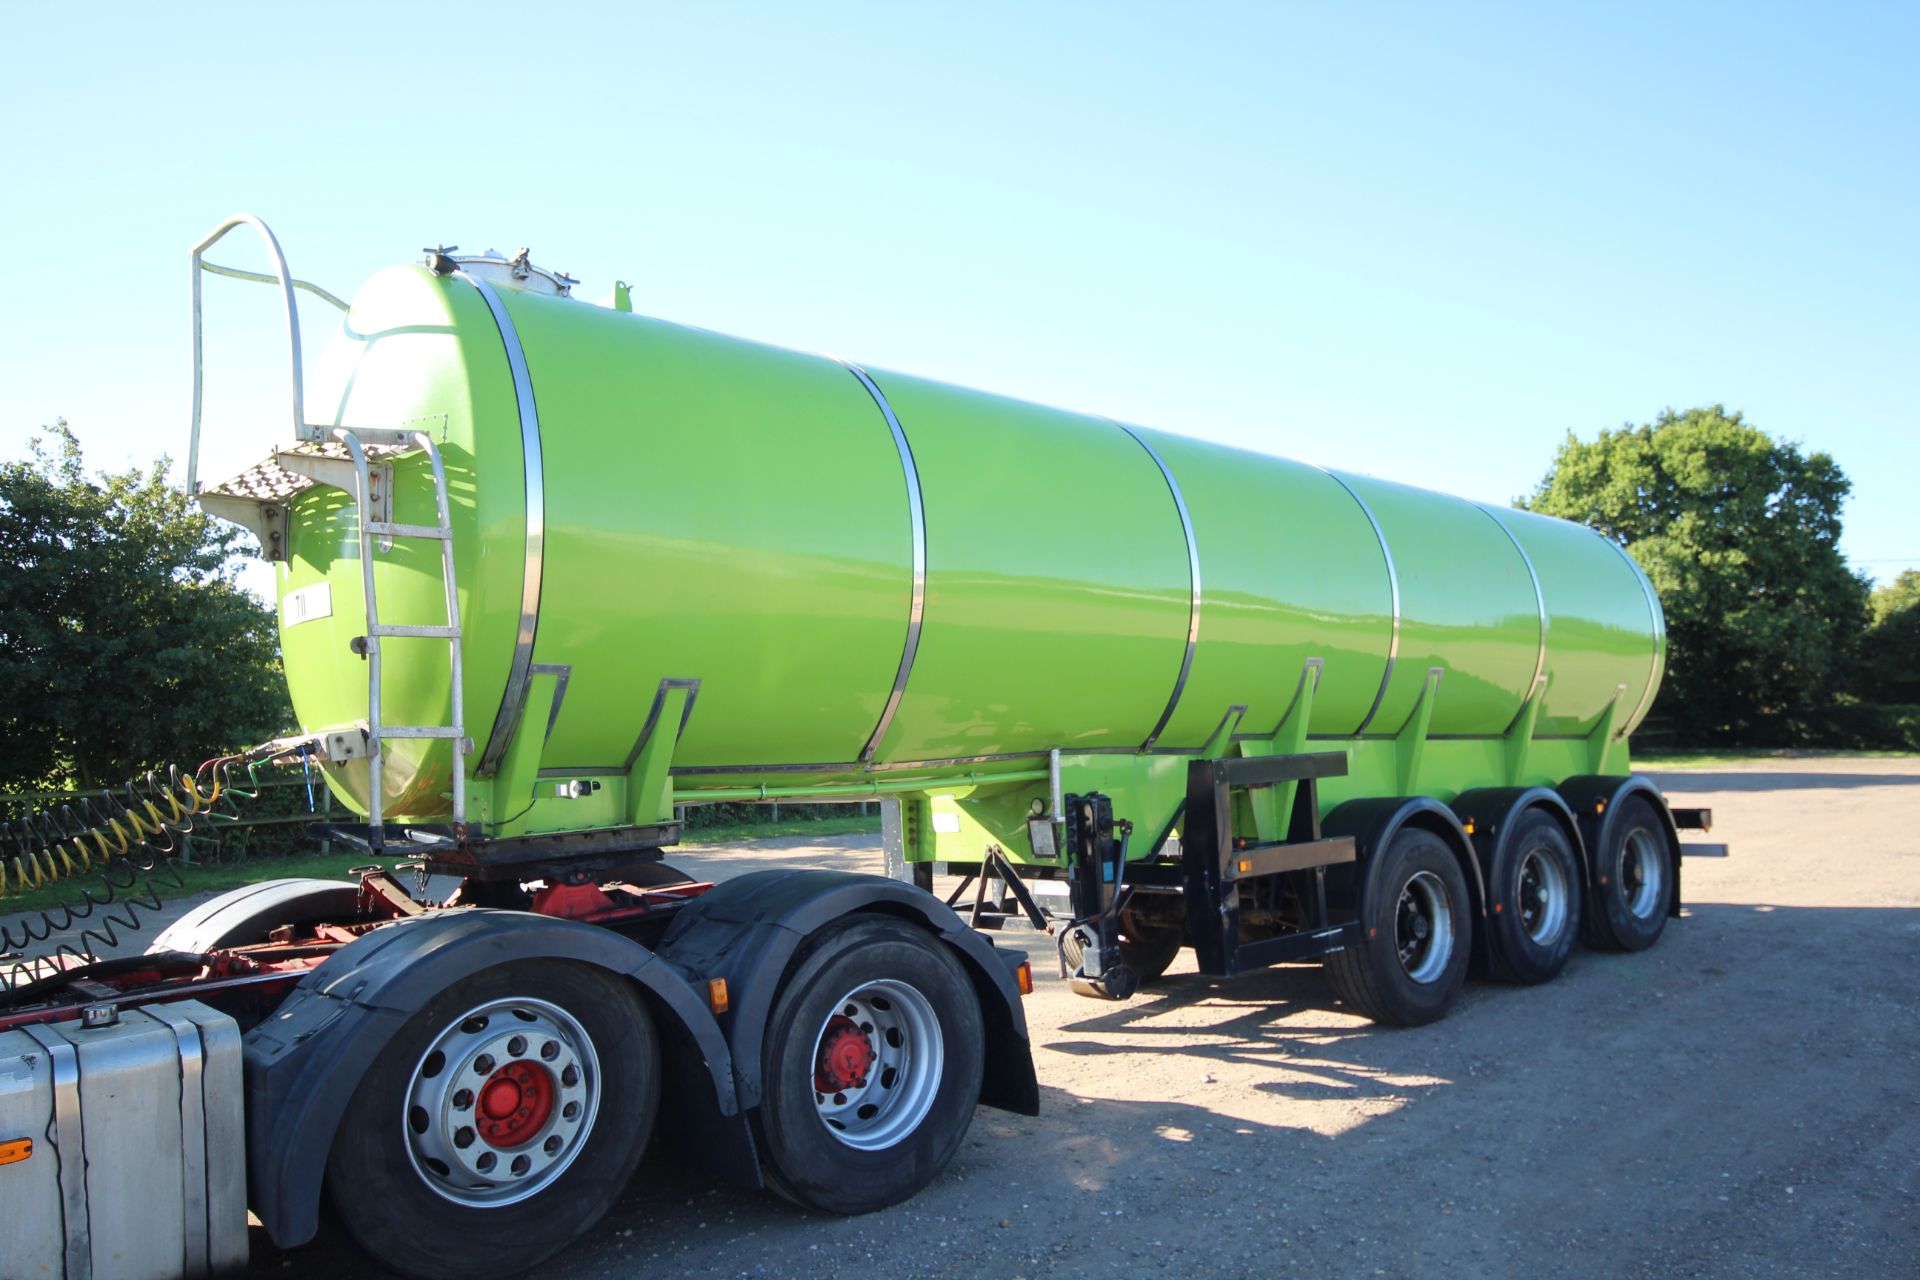 Dairy Products Transport 24,575L stainless steel tri-axle tanker. Registration A160342. Date of - Image 7 of 54